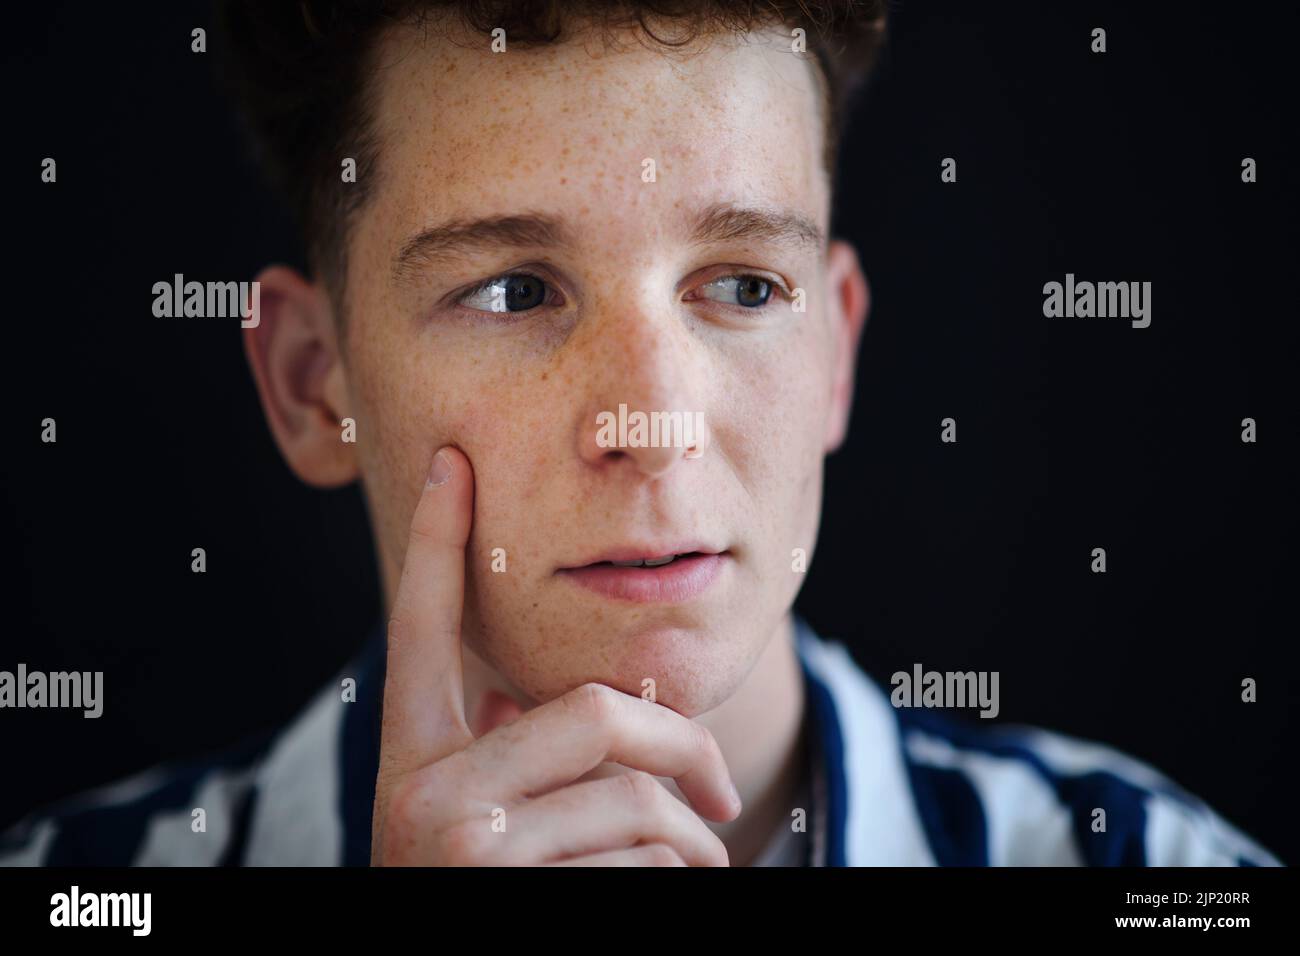 Portrait of thoughtful handsome young man with ginger hair and freckles looking away on black background, close-up Stock Photo